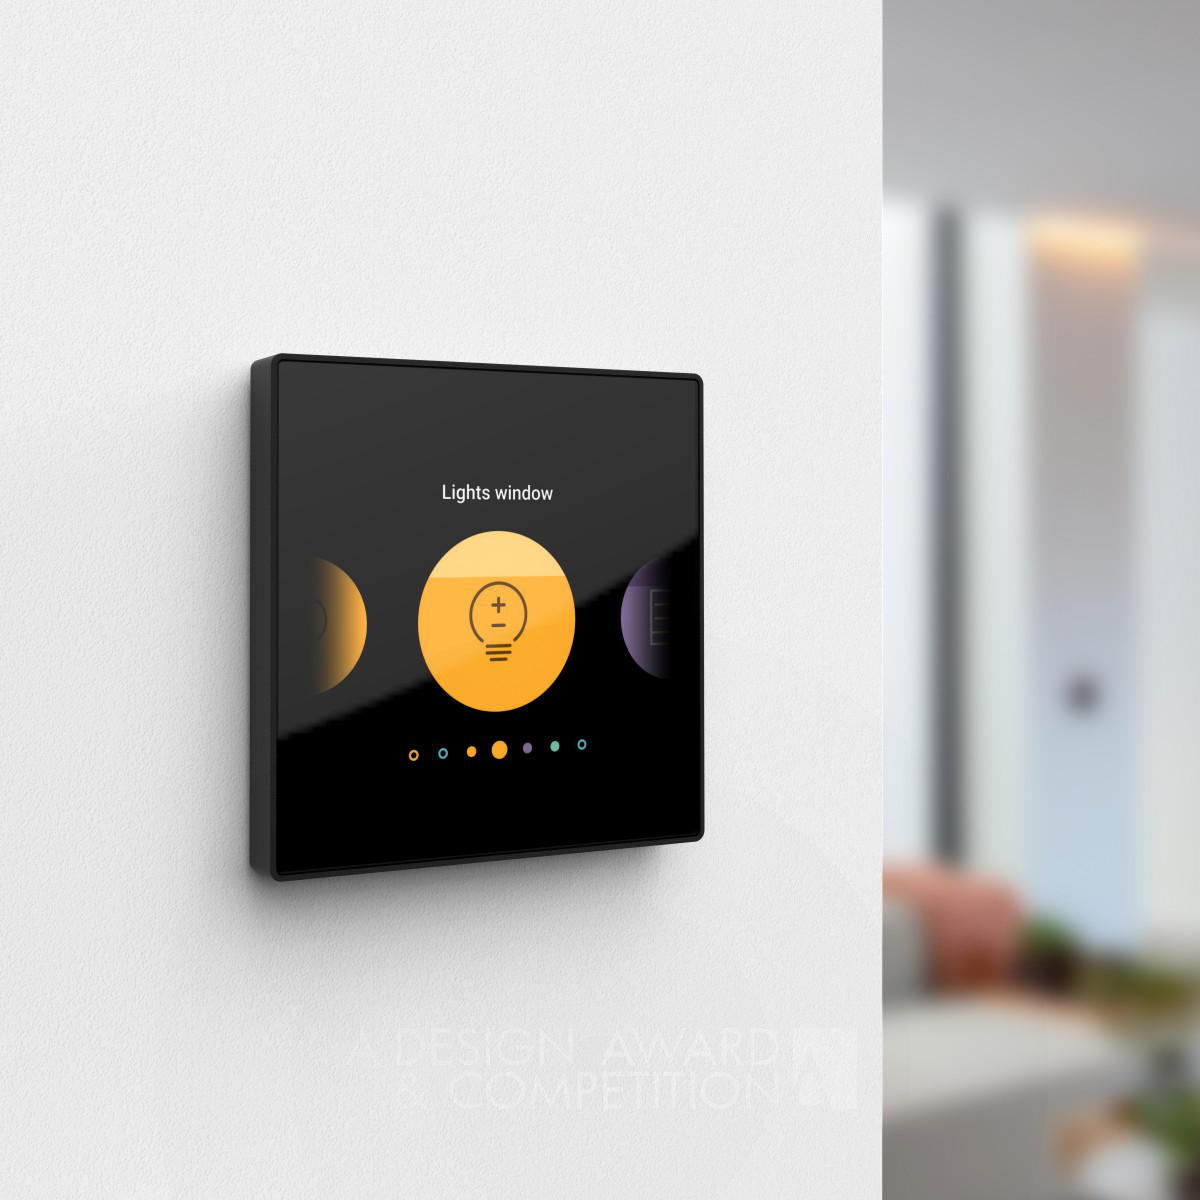 touchswitch Digital Room Control Button by Niko Design Team Golden Building Materials and Construction Components Design Award Winner 2019 